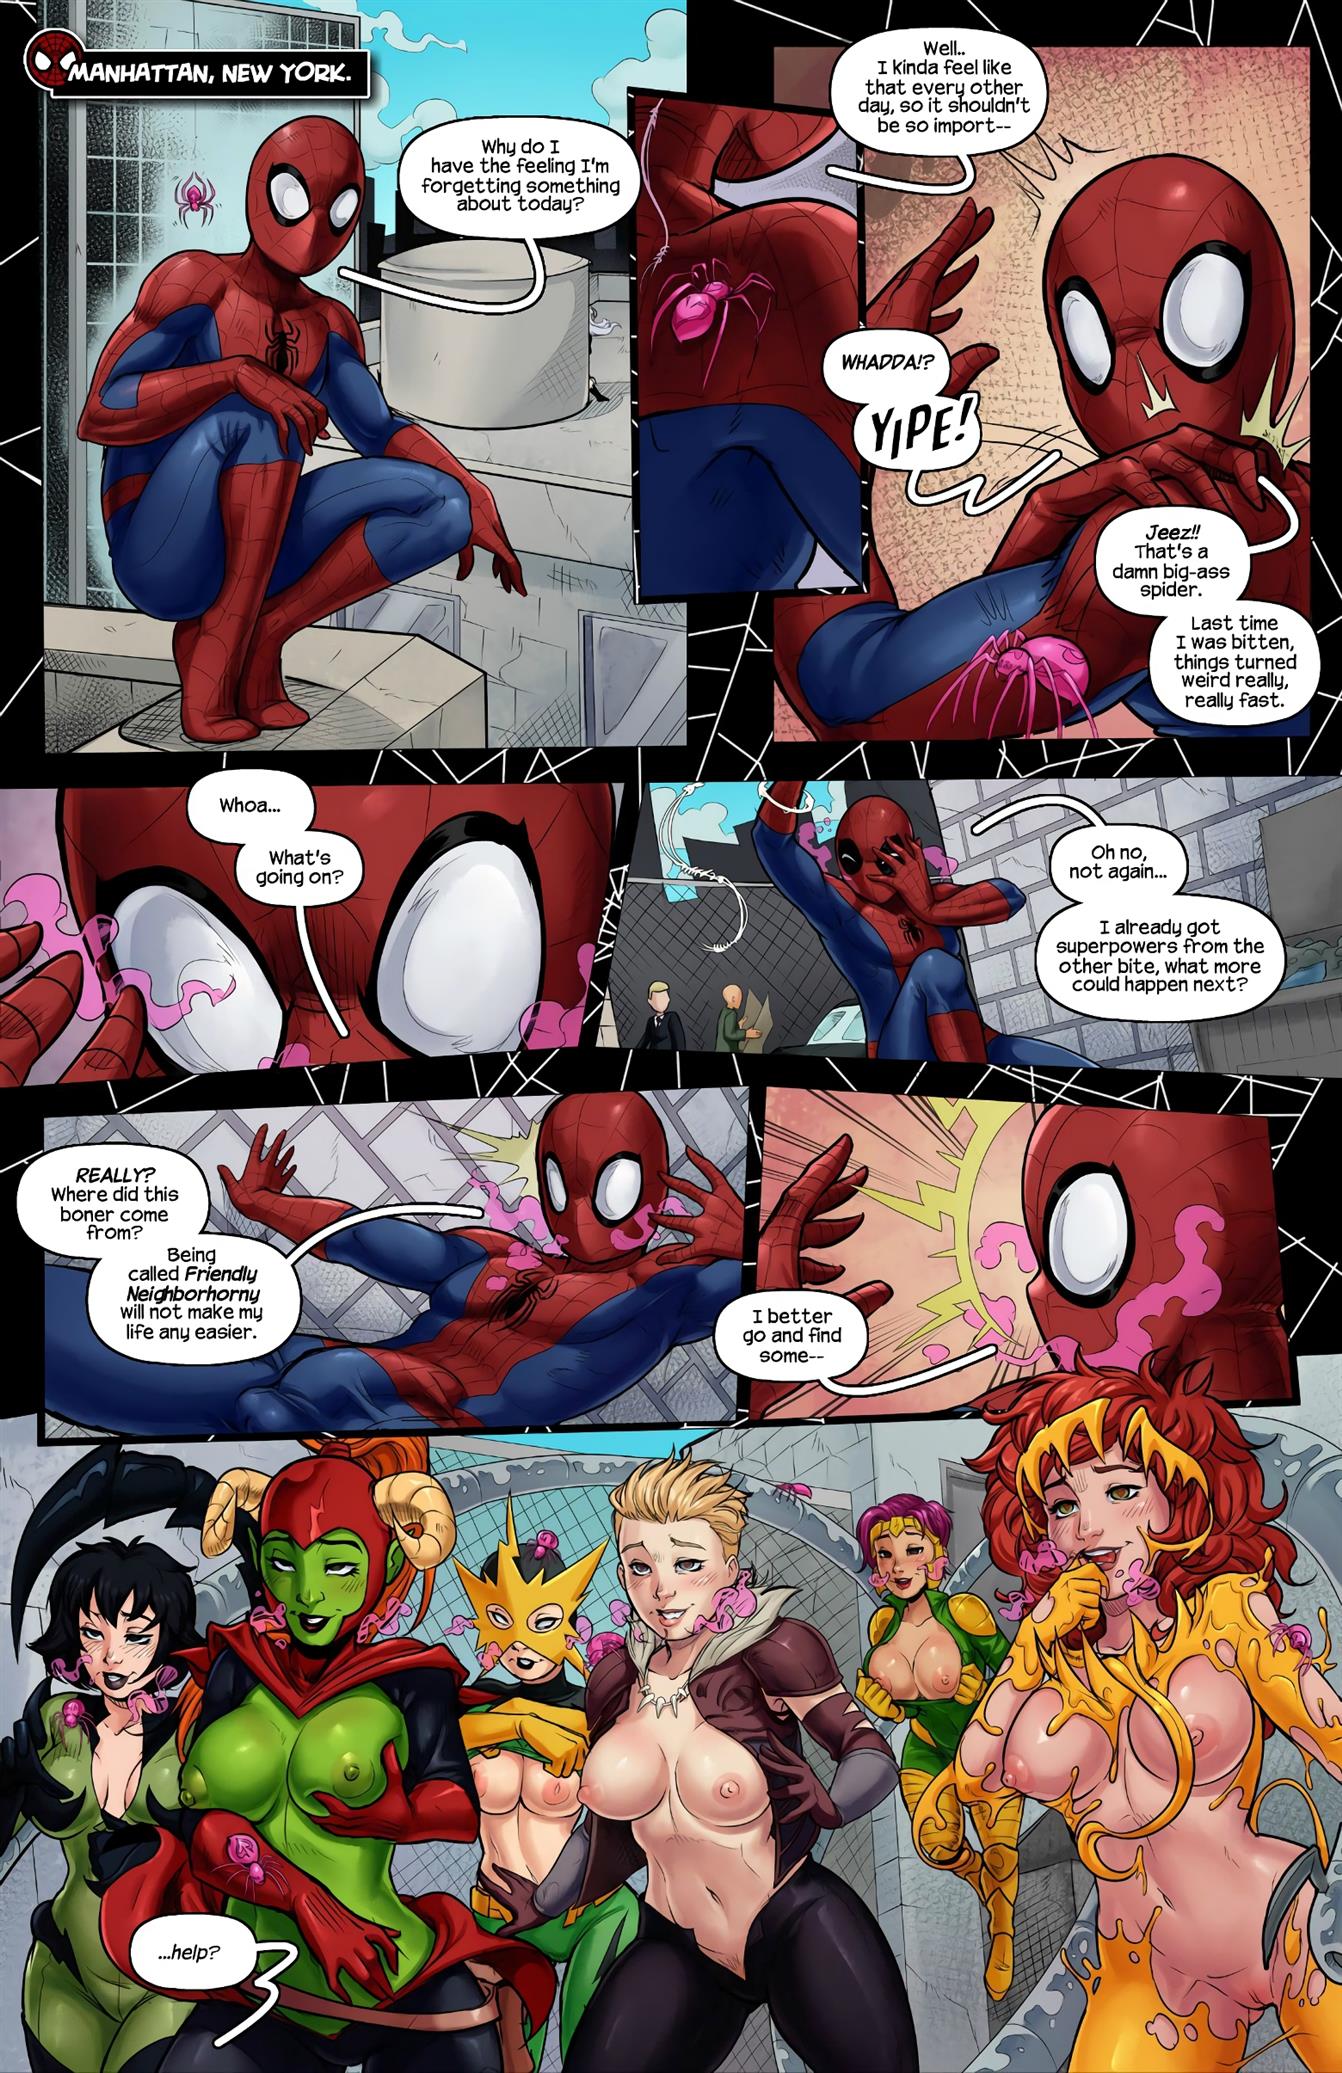 Sinful Six (Spider-Man) [Tracy Scops]